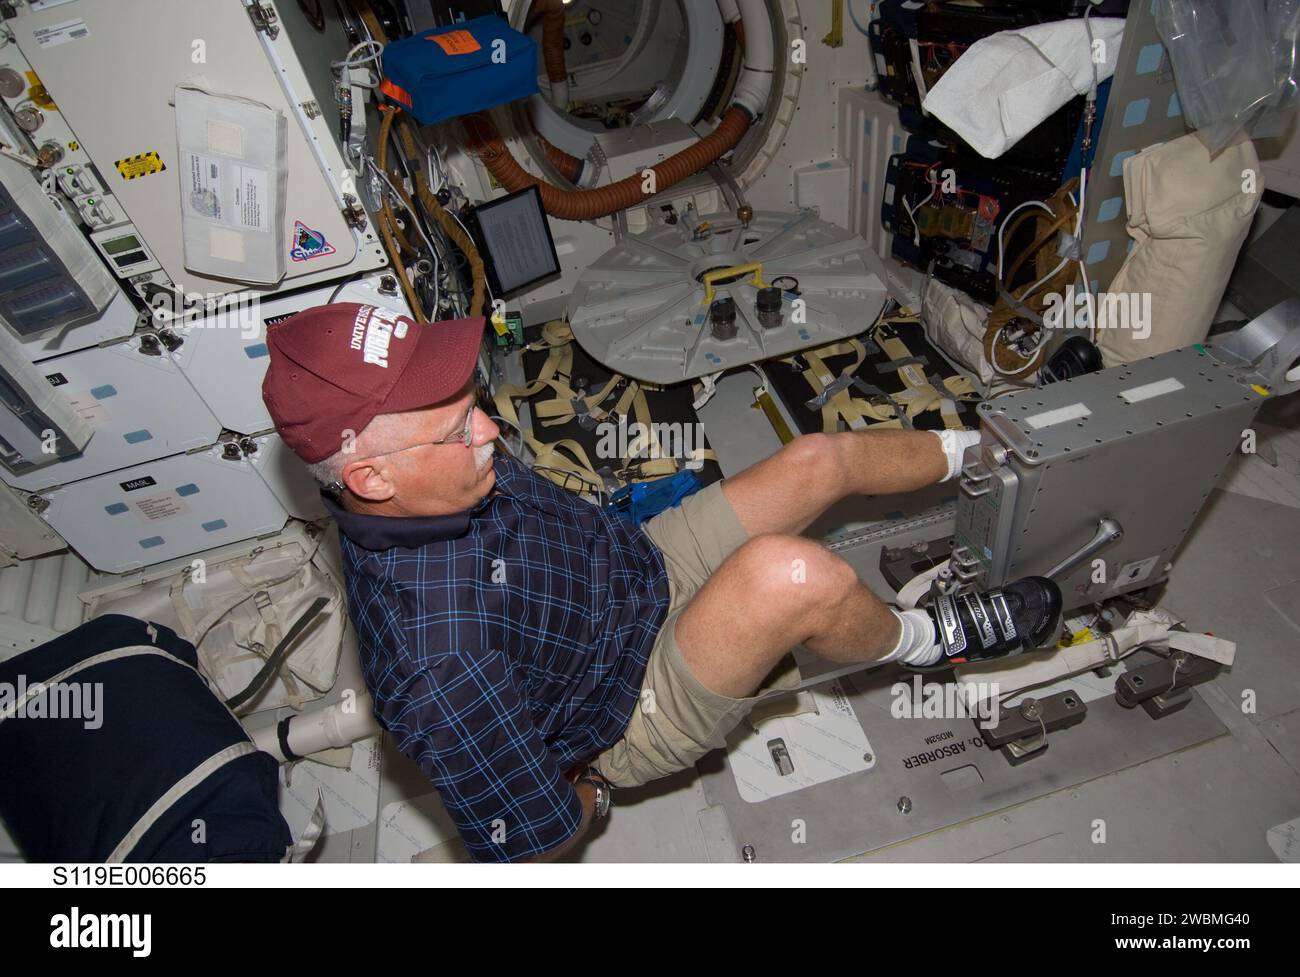 S119-E-006665 (19 March 2009) --- Astronaut John Phillips, STS-119 mission specialist, exercises on a bicycle ergometer on the middeck of Space Shuttle Discovery while docked with the International Space Station. Stock Photo